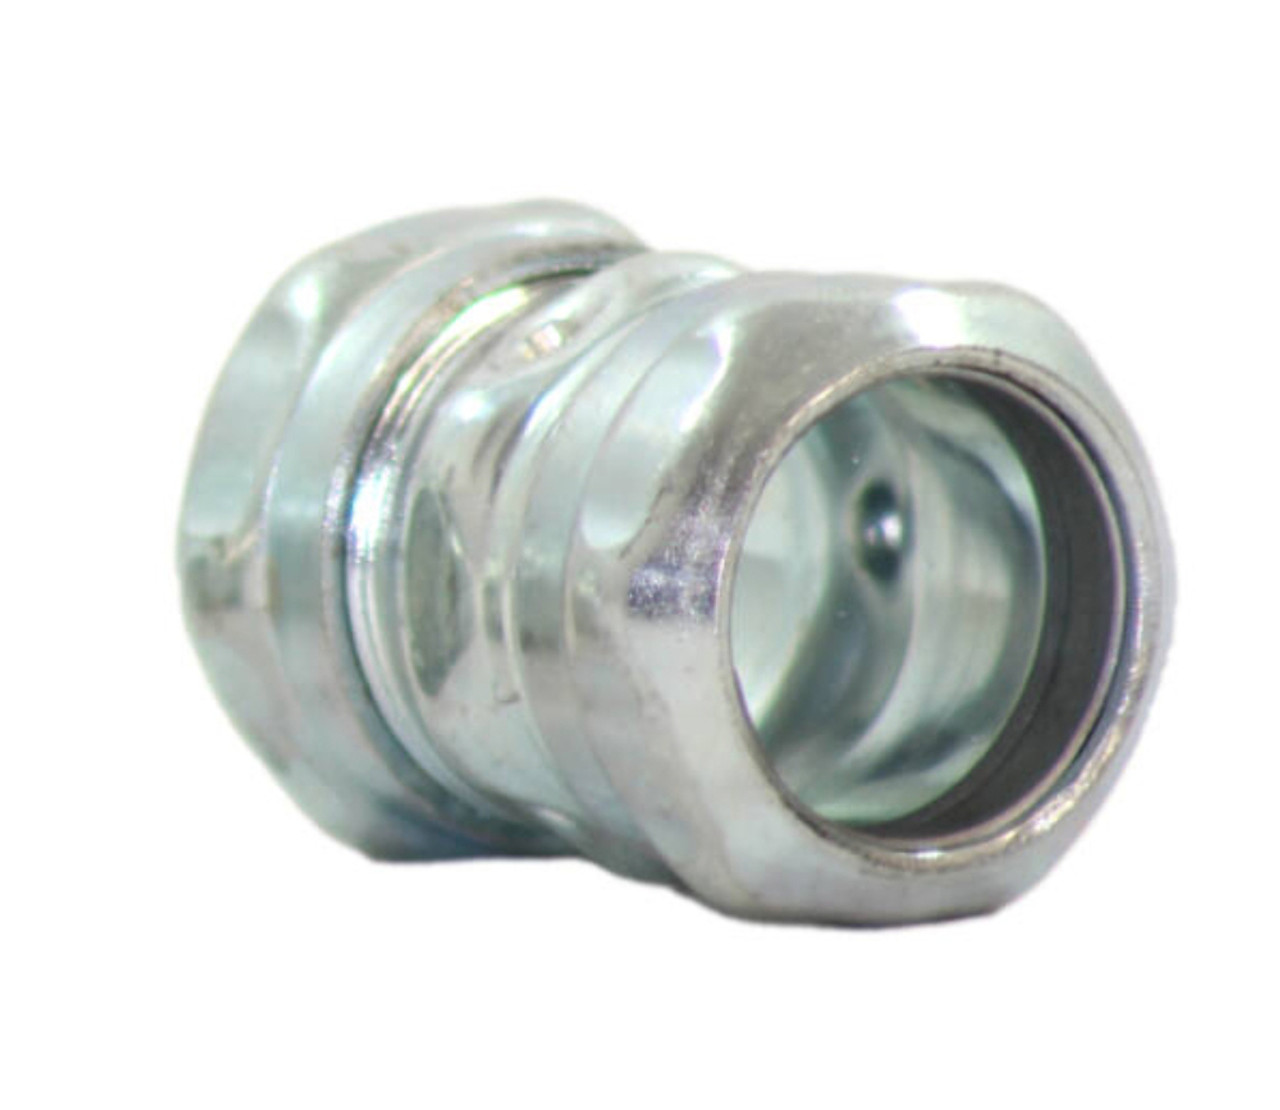 YAGI 661S EMT Compression Coupling Material: Zinc Plated Steel Size: 3/4 Inch